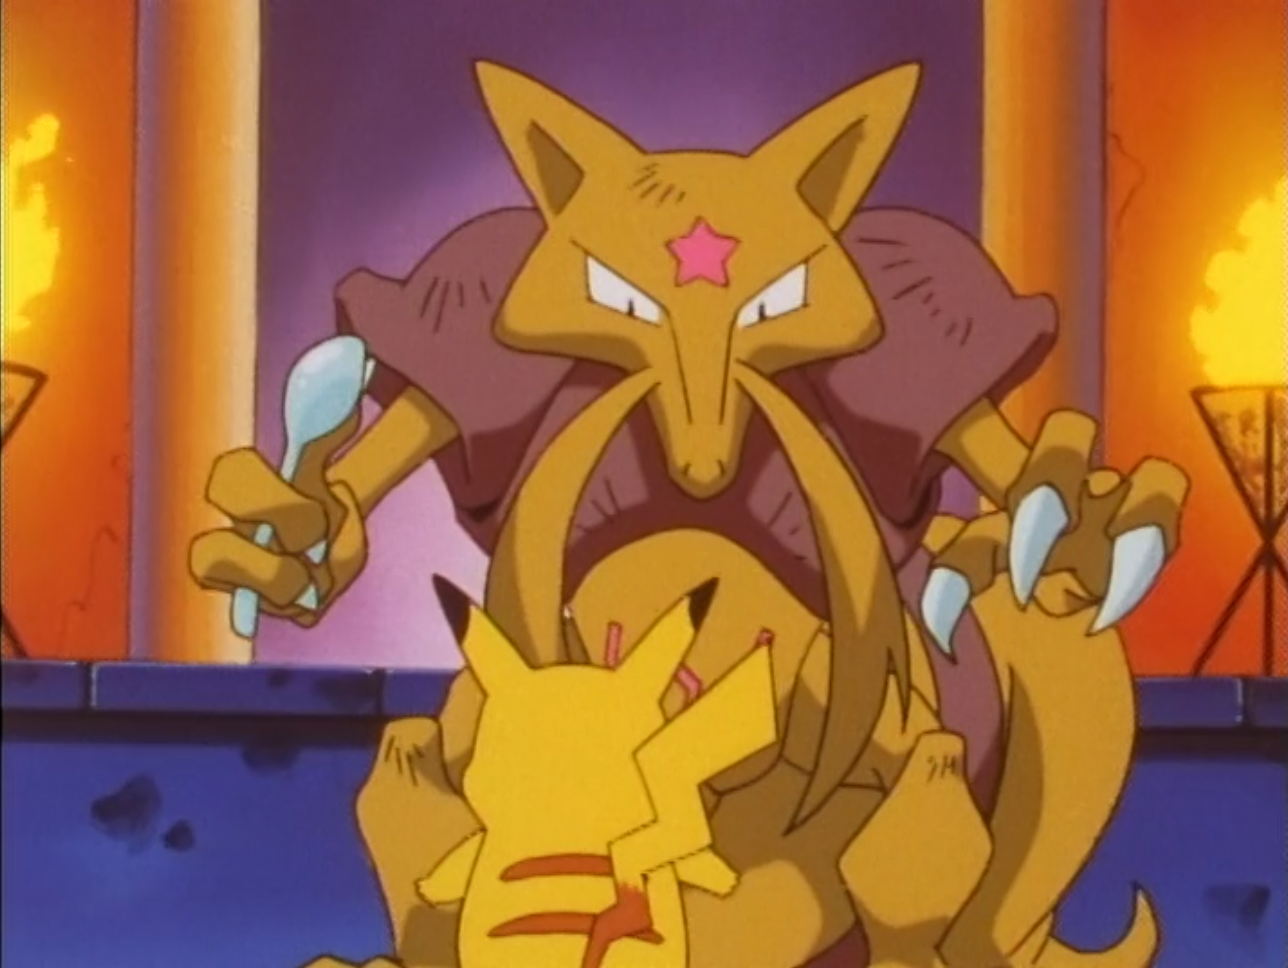 26 Awesome And Interesting Facts About Kadabra From Pokemon.